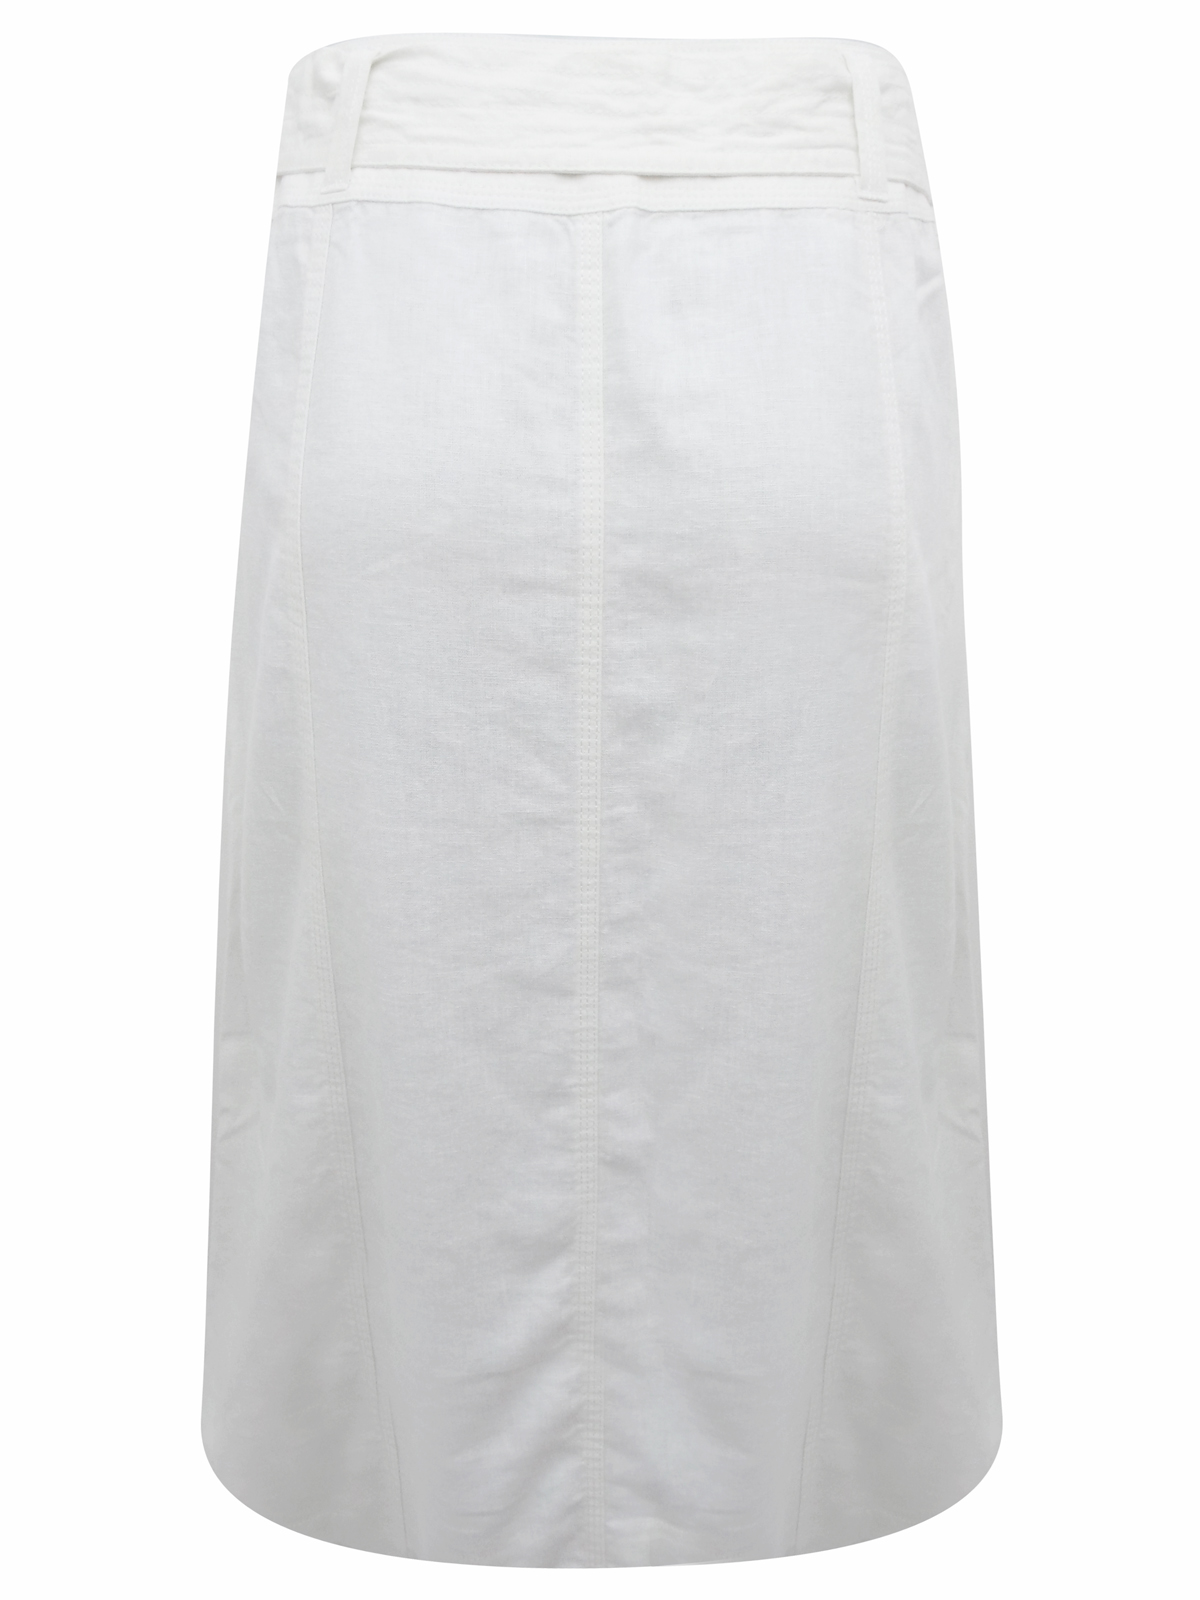 Marks and Spencer - - M&5 WHITE Linen Blend Belted A-Line Skirt - Size ...